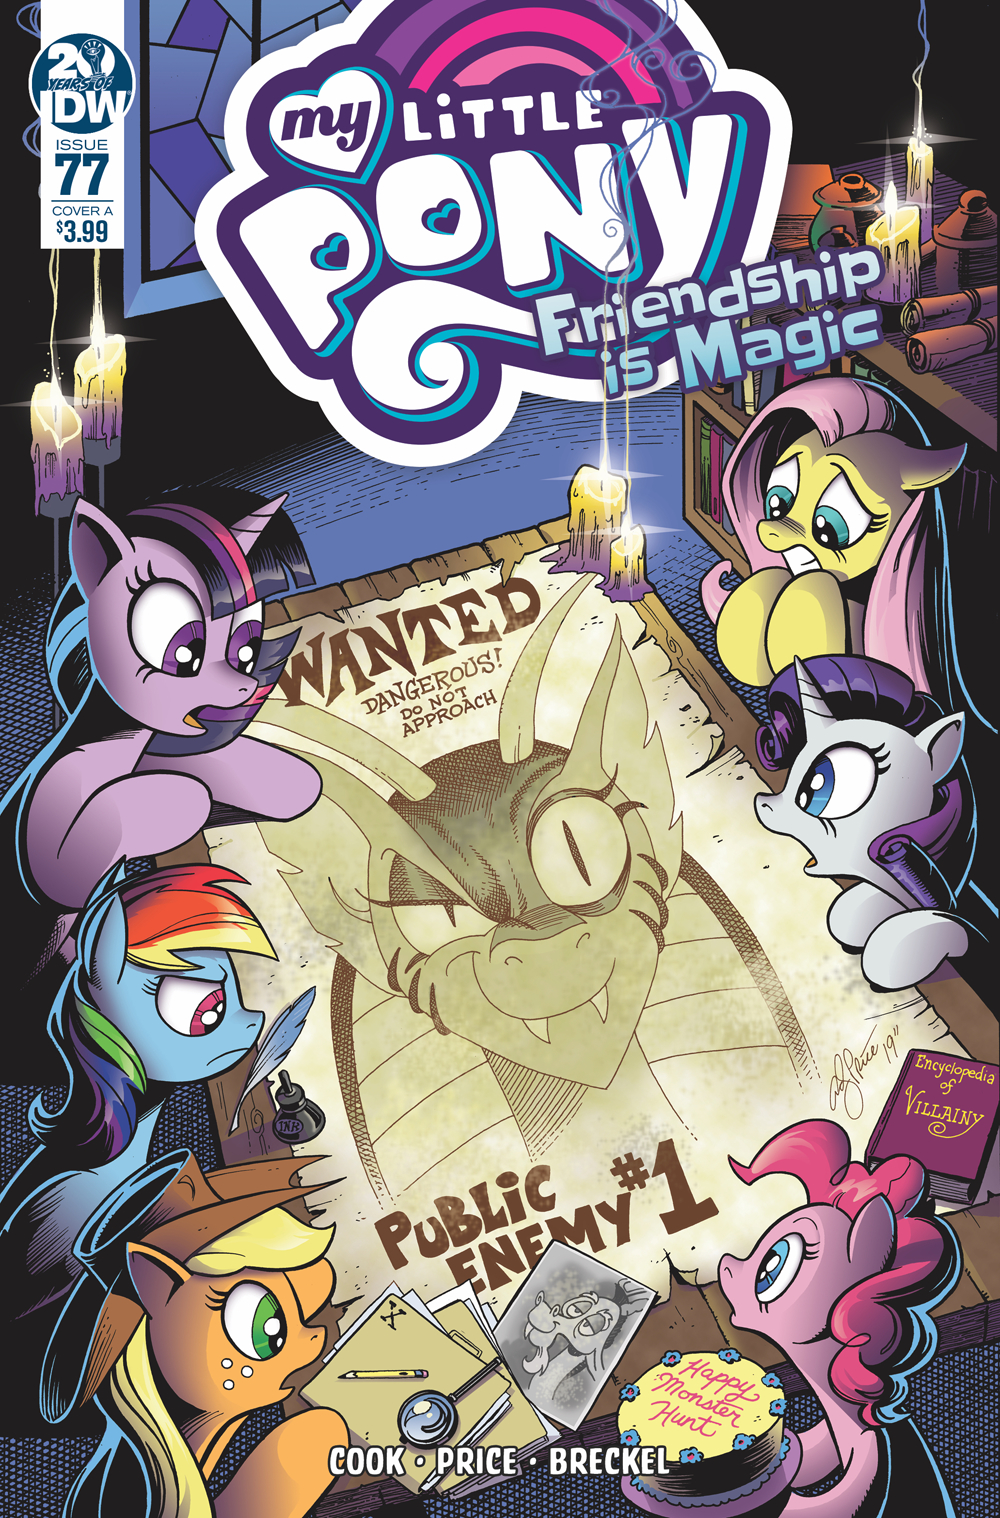 My Little Pony: Friendship is Magic no. 77 (2013 Series)